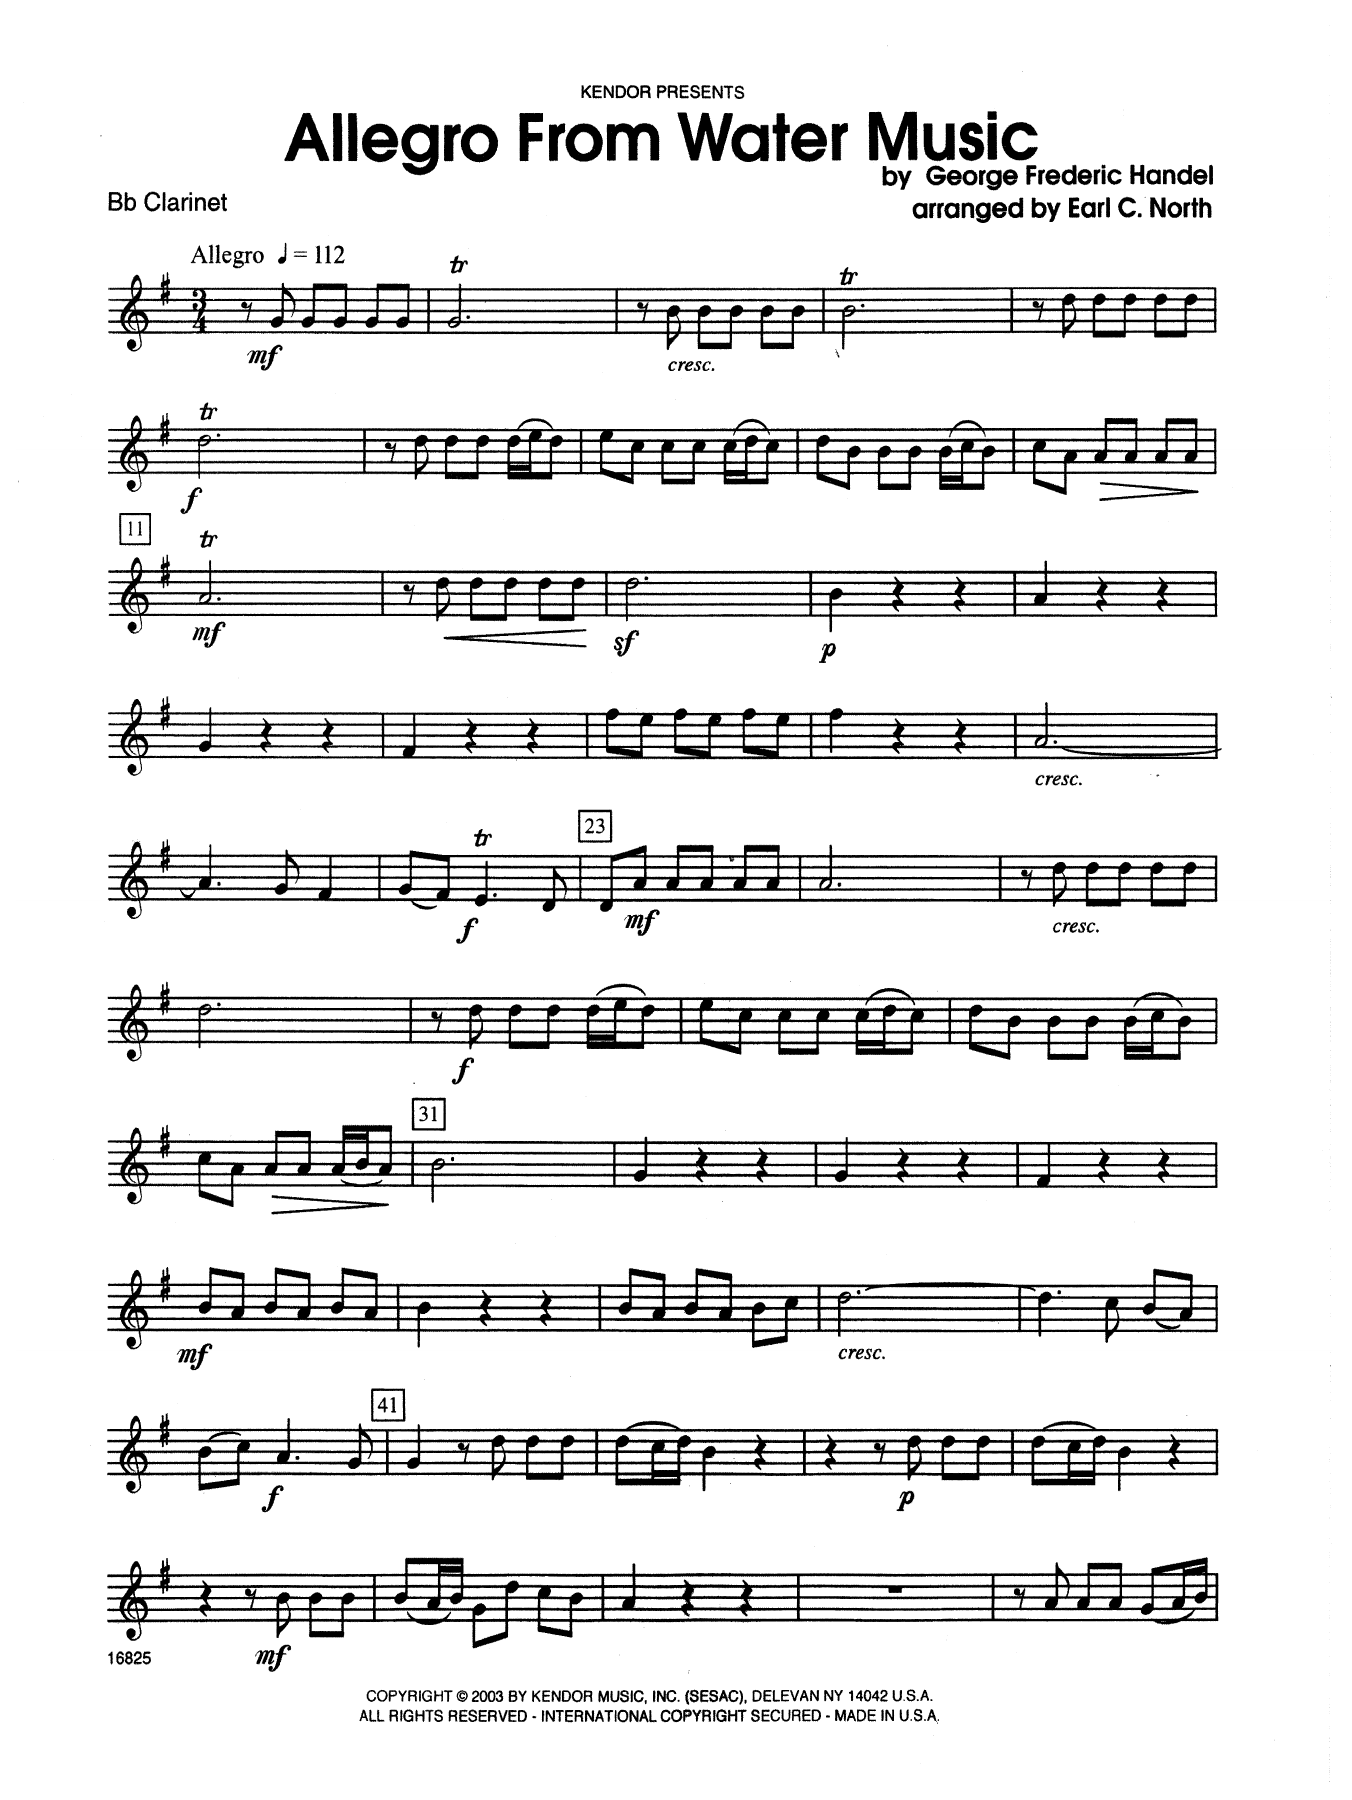 Download Earl North Allegro From Water Music - Bb Clarinet Sheet Music